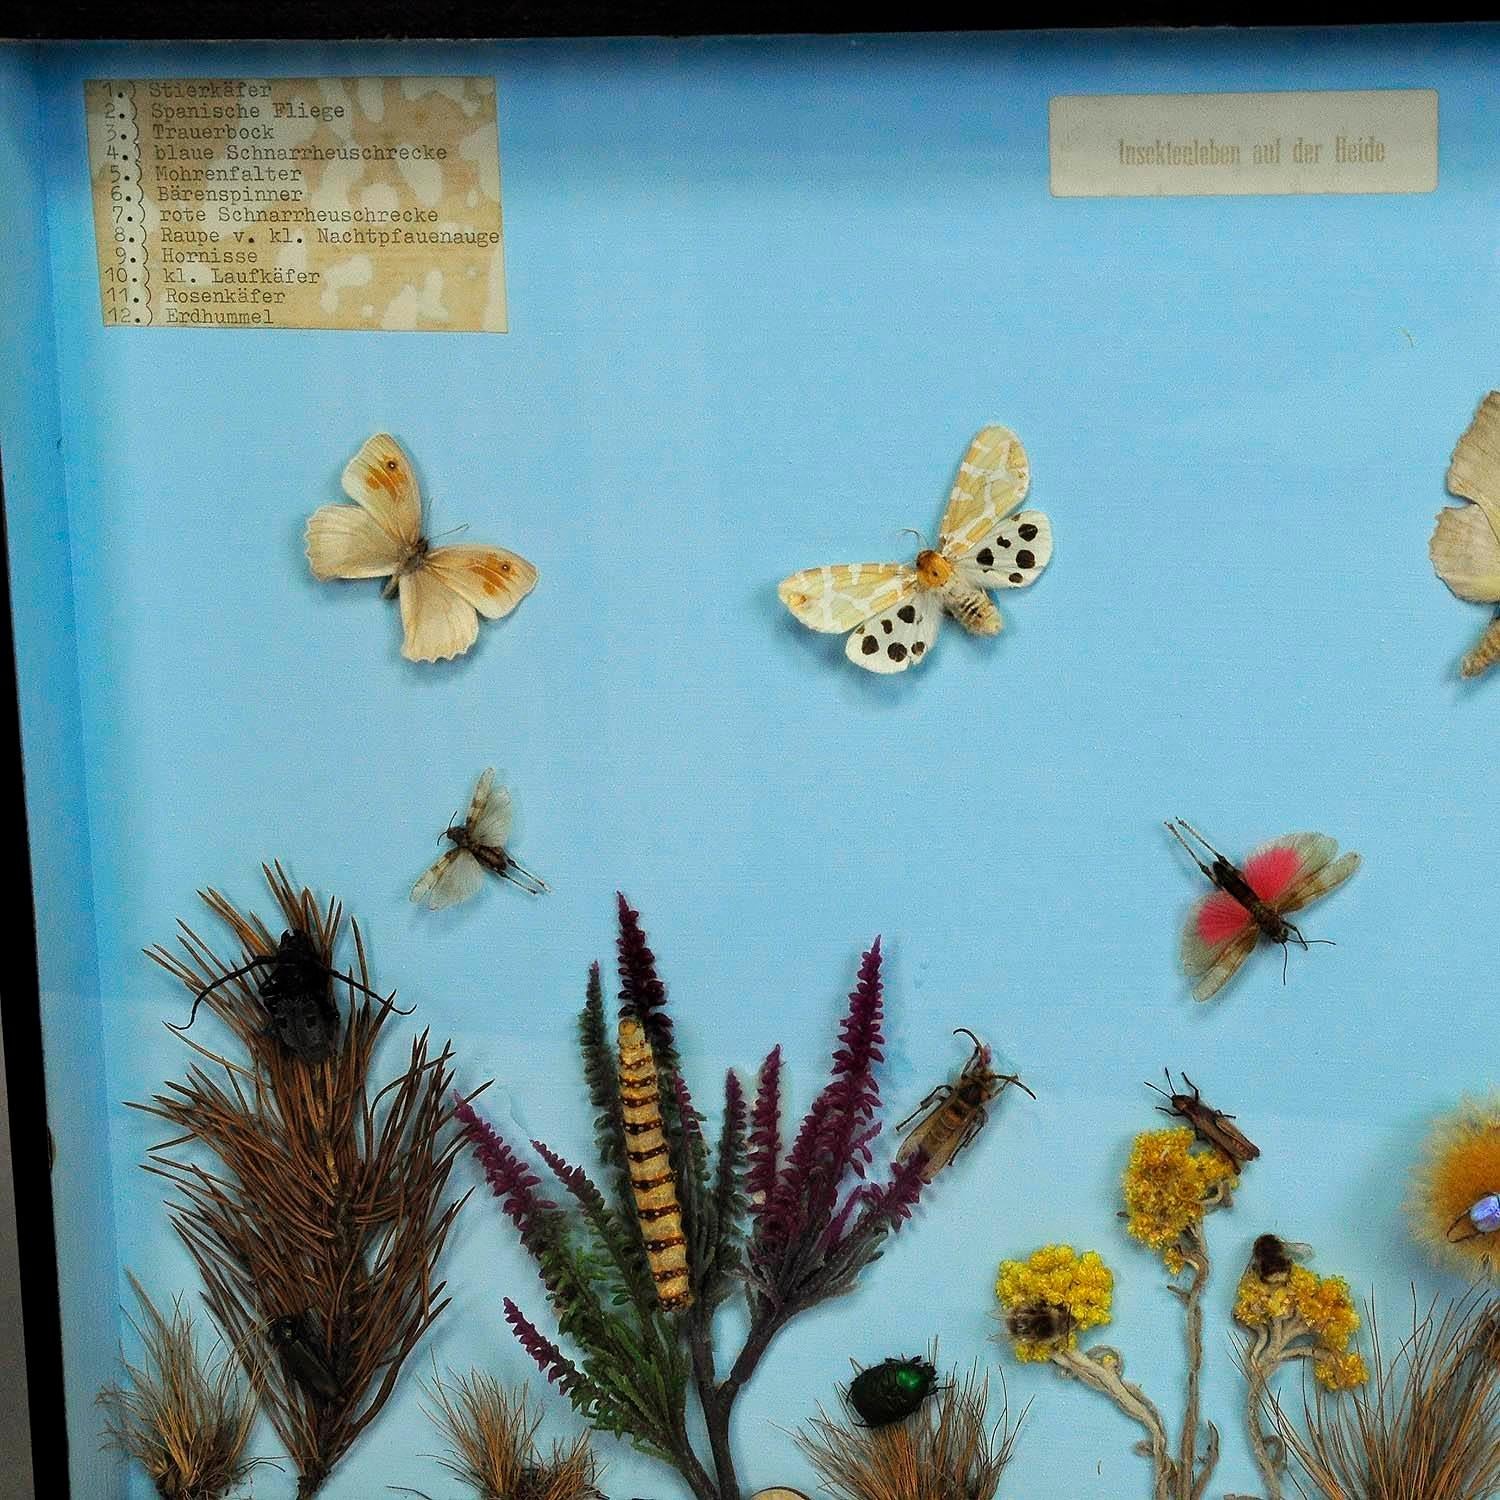 Mid-Century Modern Great Vintage School Teaching Display of the Insects of the Heath For Sale